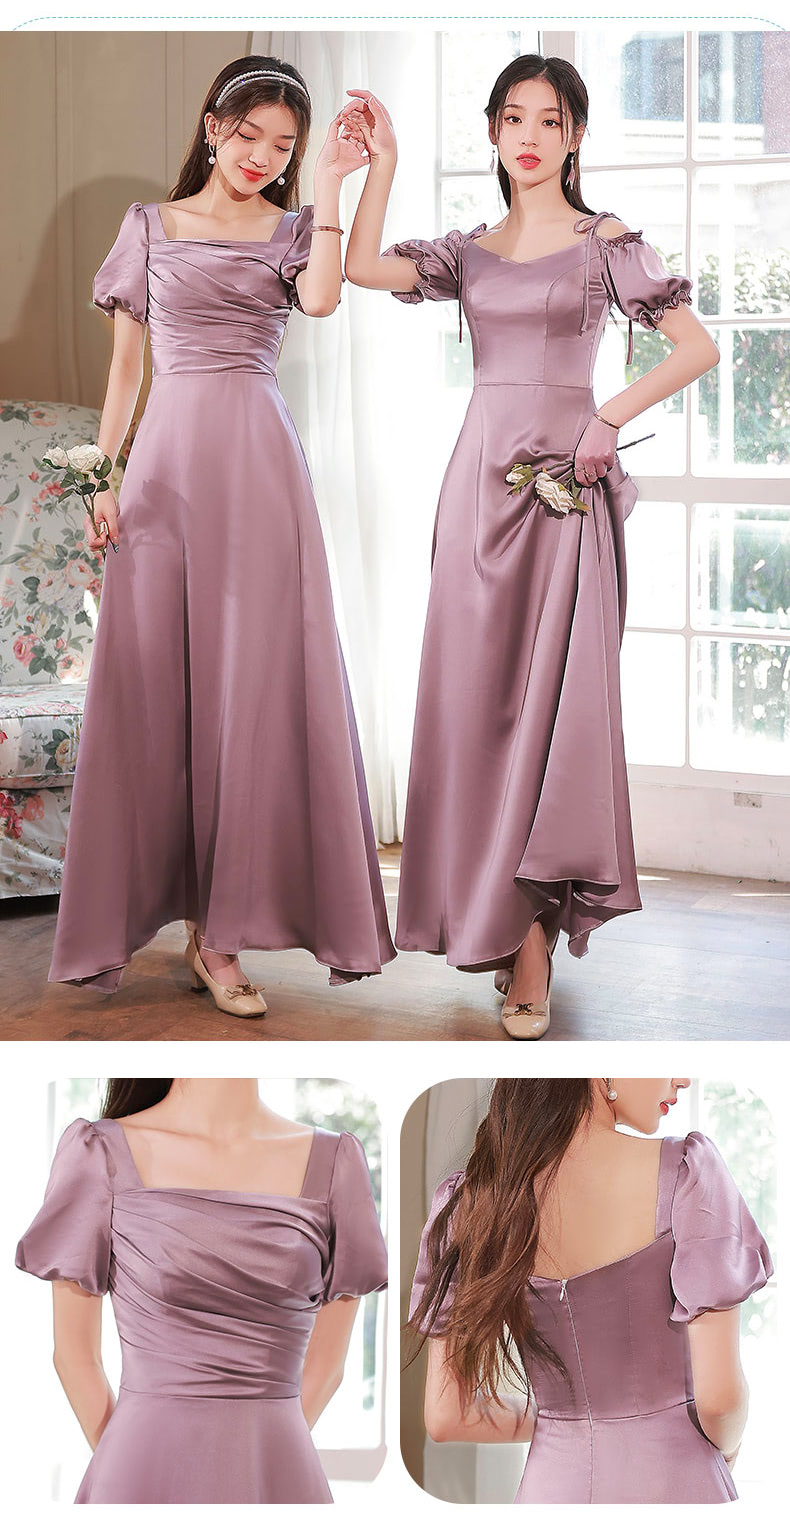 Sweet-Sexy-Purple-Satin-Bridesmaid-Long-Dress-Party-Casual-Ball-Gown17.jpg